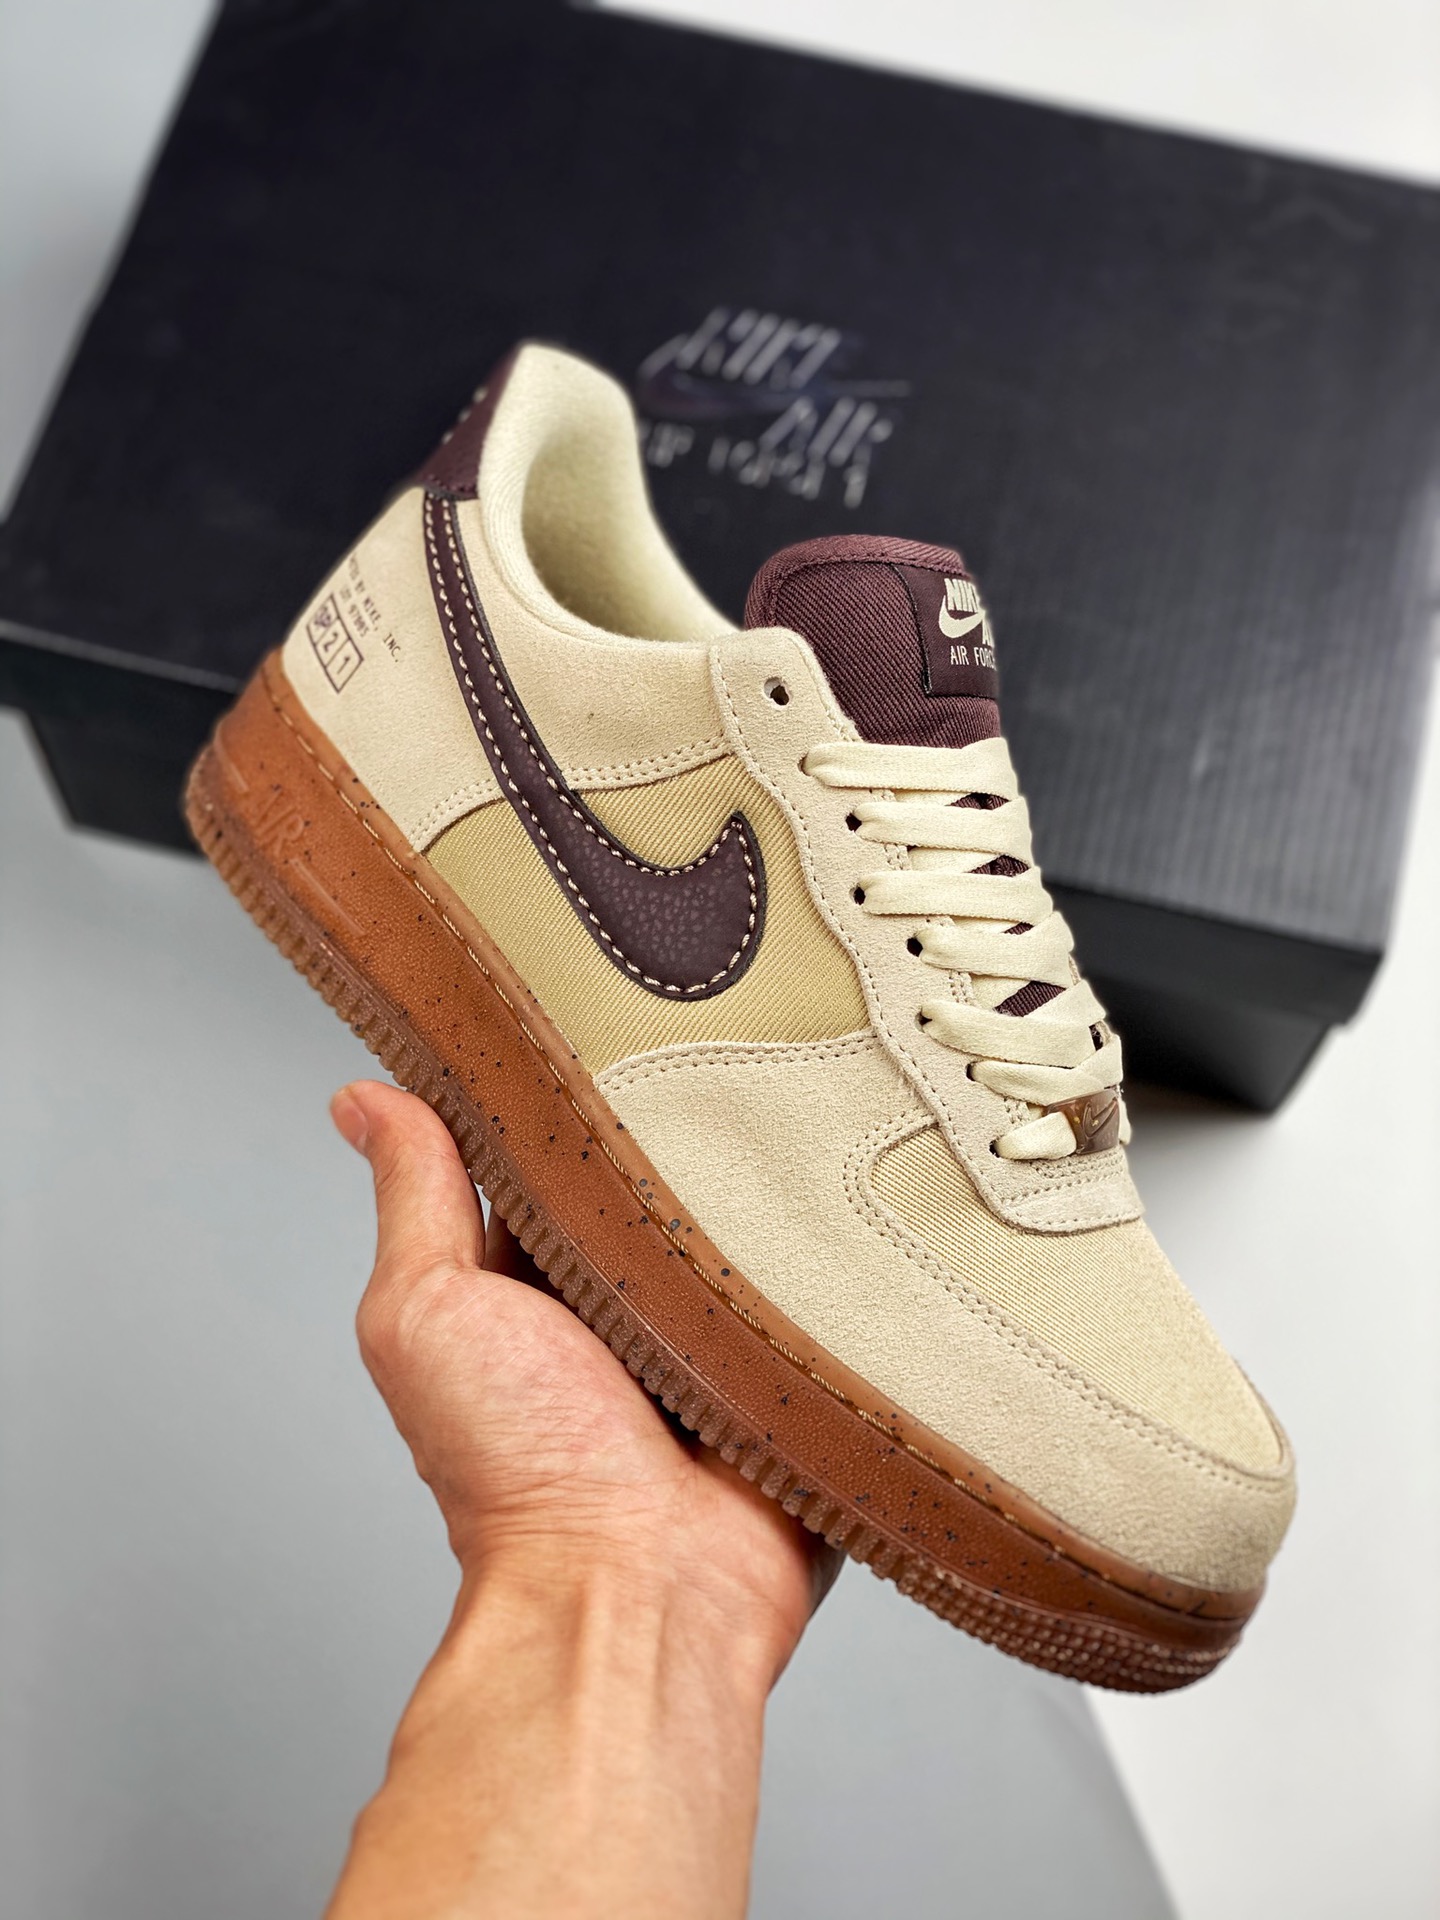 Nike Air Force 1 Low “Coffee” Beach/Grain-Pale Ivory-Mahogany For Sale ...